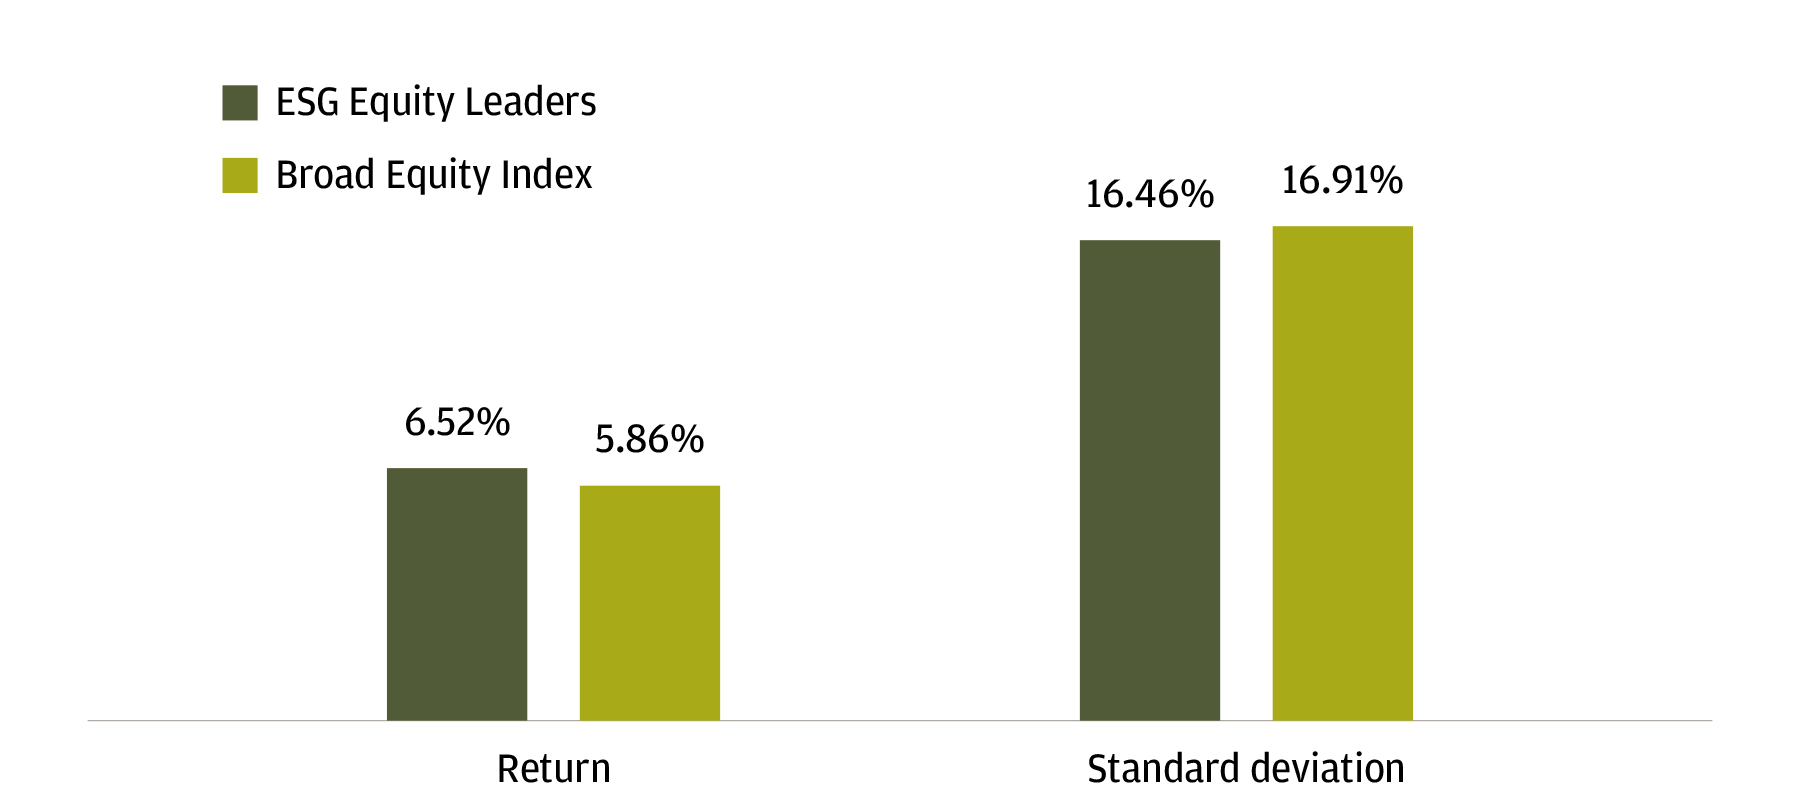 The chart titled "Historical return and standard deviation in equities" is made up of 2 sets of bar charts. One bar is "ESG Equity Leaders" and the other bar is "Broad equity index". The first set is titled "Return", and the bar representing ESG equity has a value of 6.52% and the bar next to it representing Broad equity index has a value of 5.86%. The set next to it is titled Standard deviation, and has values of 16.64% and 16.91% for ESG equity and broad equity respectively. The data is from MorningStar for the time period between 10/1/07 and 3/31/21. The ESG Equity leaders used is the MSCI ACWI ESG Leaders NR USD Index, which invests in the top 50% of MSCI ESG rated companies. The broad equity index is the MSCI ACWI NR USD Index.